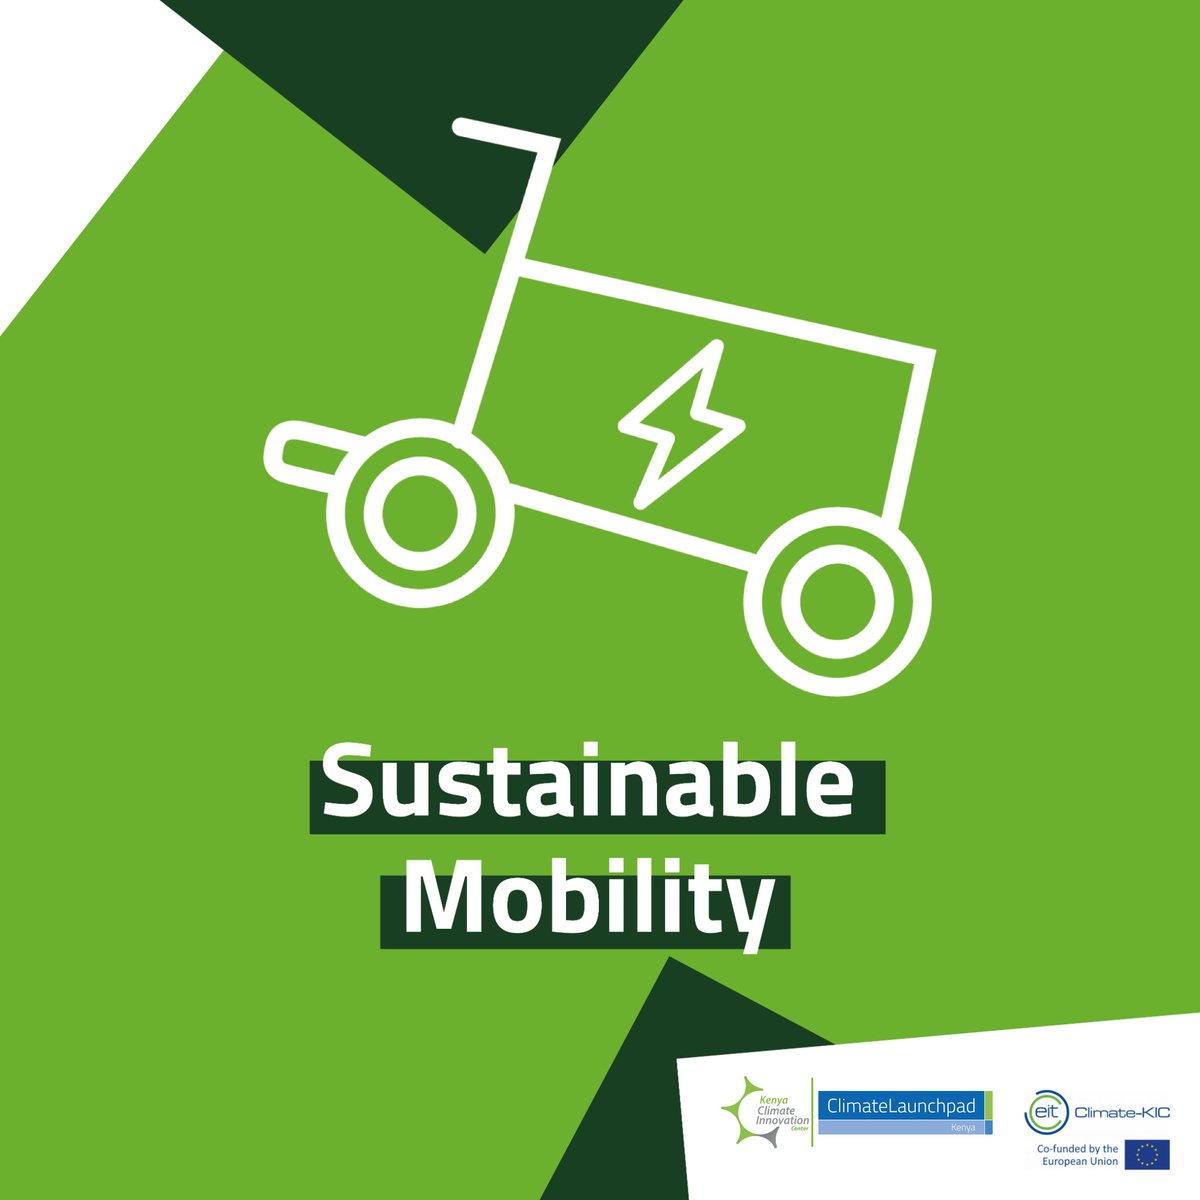 So much is still to gain in mobility. In Kenya, discussions around sustainable mobility are gaining momentum as we recognize the pressing need to address #transportation emissions, which contribute to 29% of #greenhouse gas #emissions. Innovations in battery technology, smart…